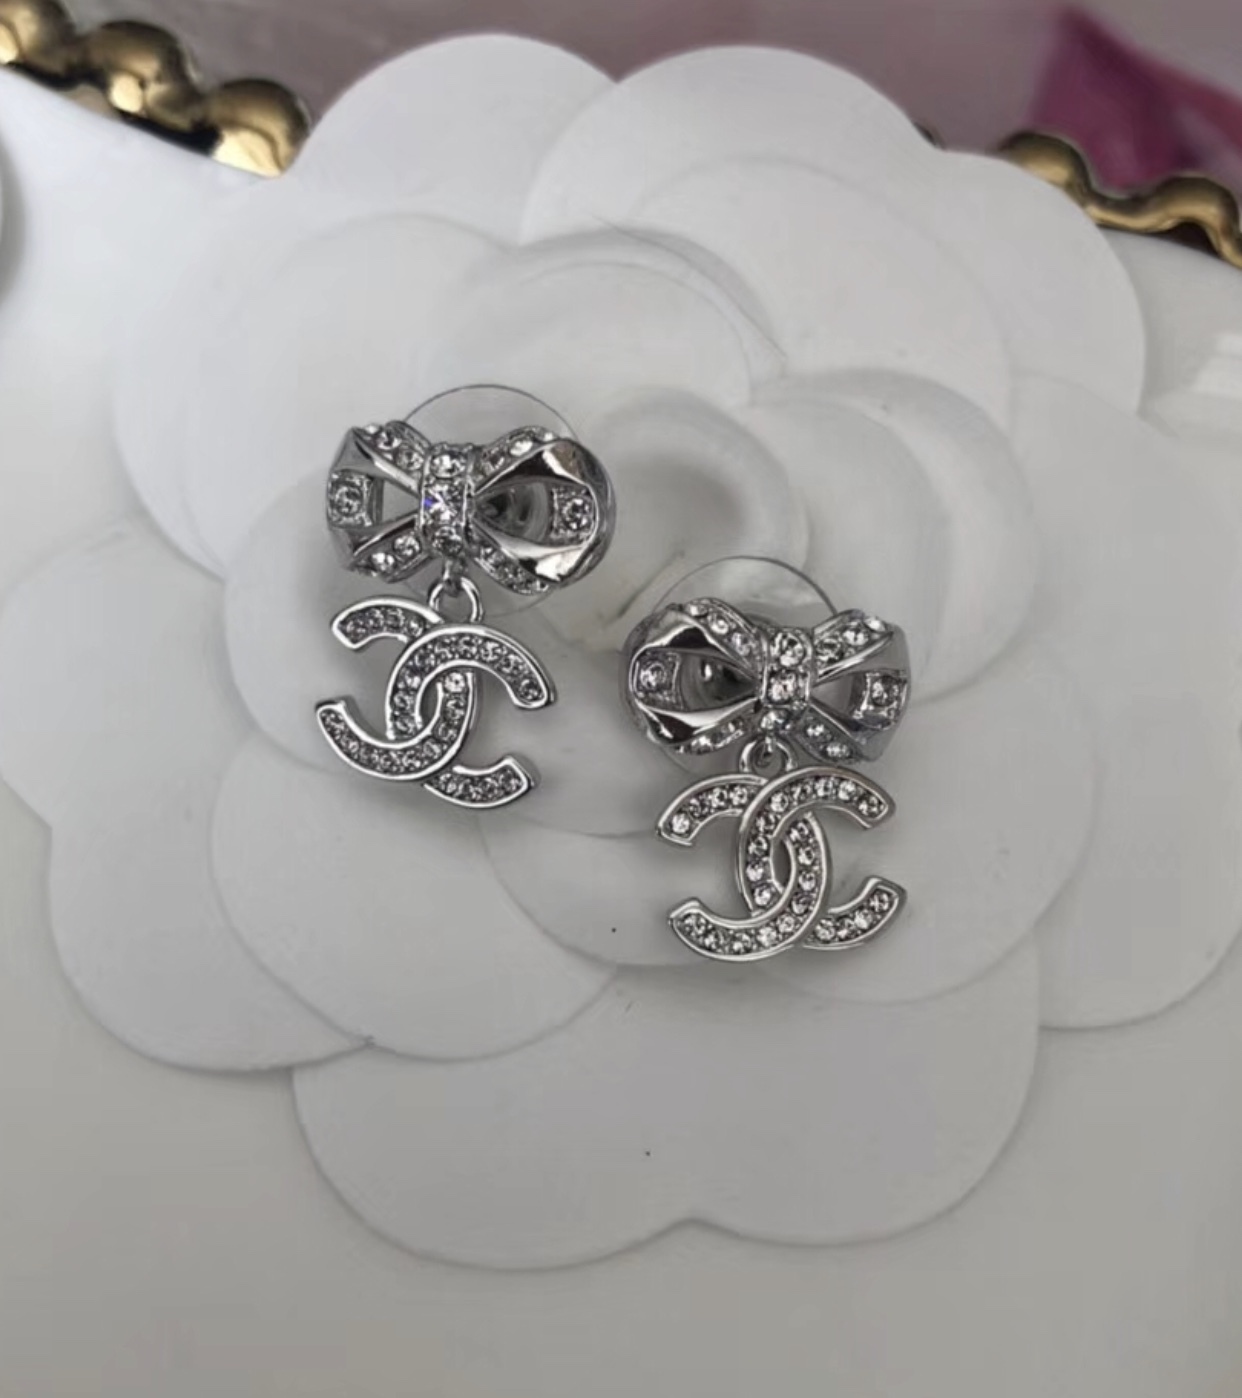 100% Auth Chanel 2018 Spring Cc Crystal Bow and 50 similar items